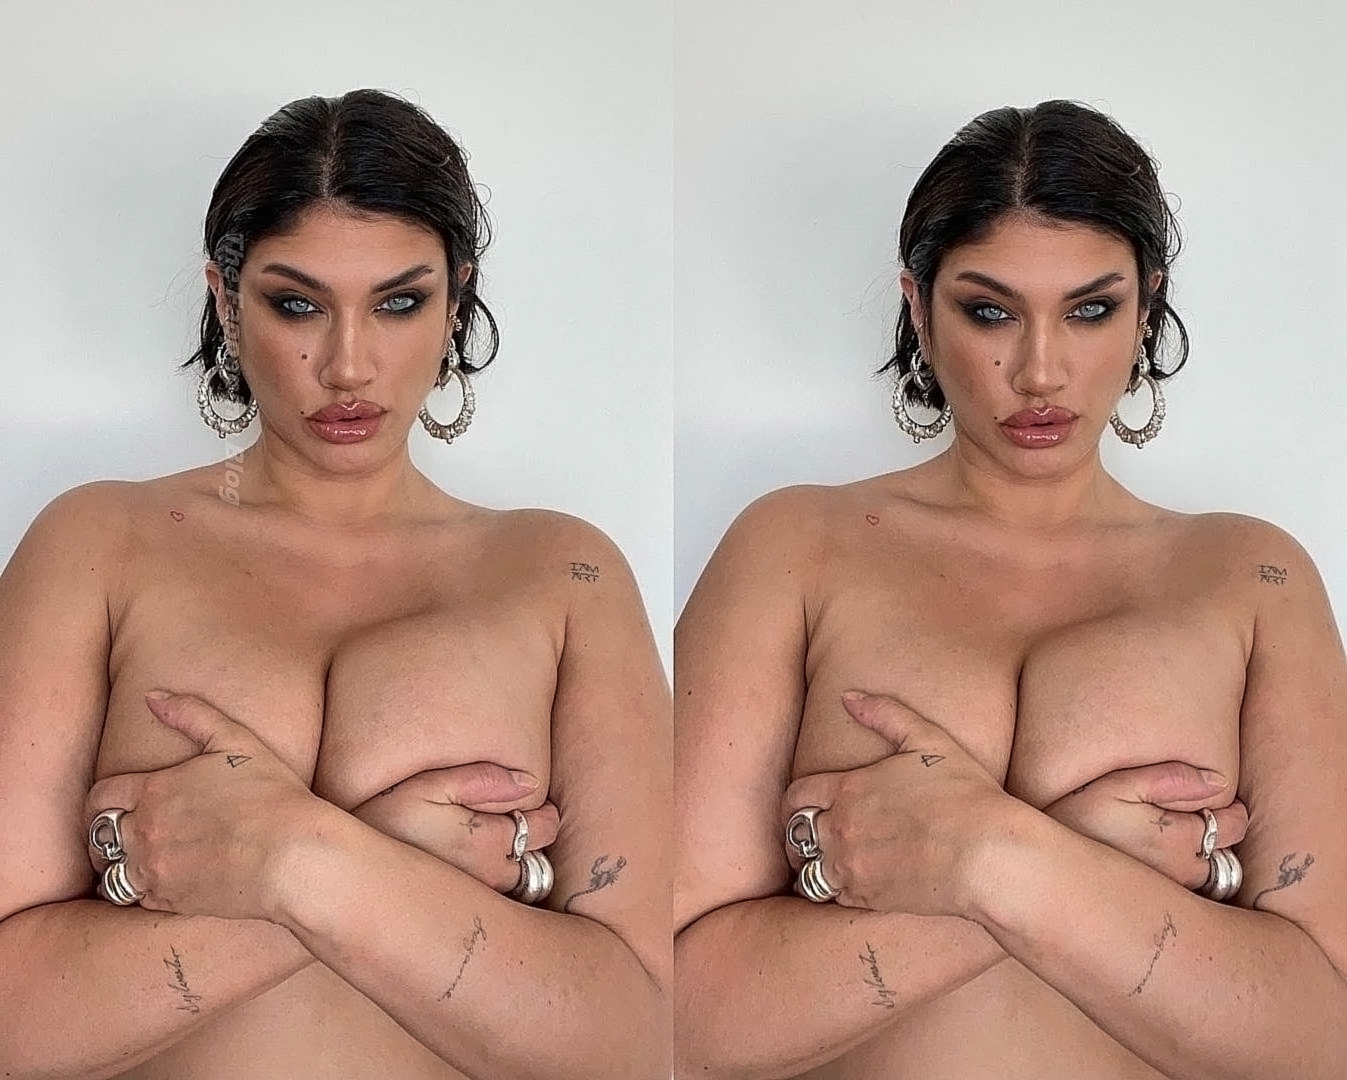 Check out La’Tecia Thomas' slightly nude and topless photos from Insta...